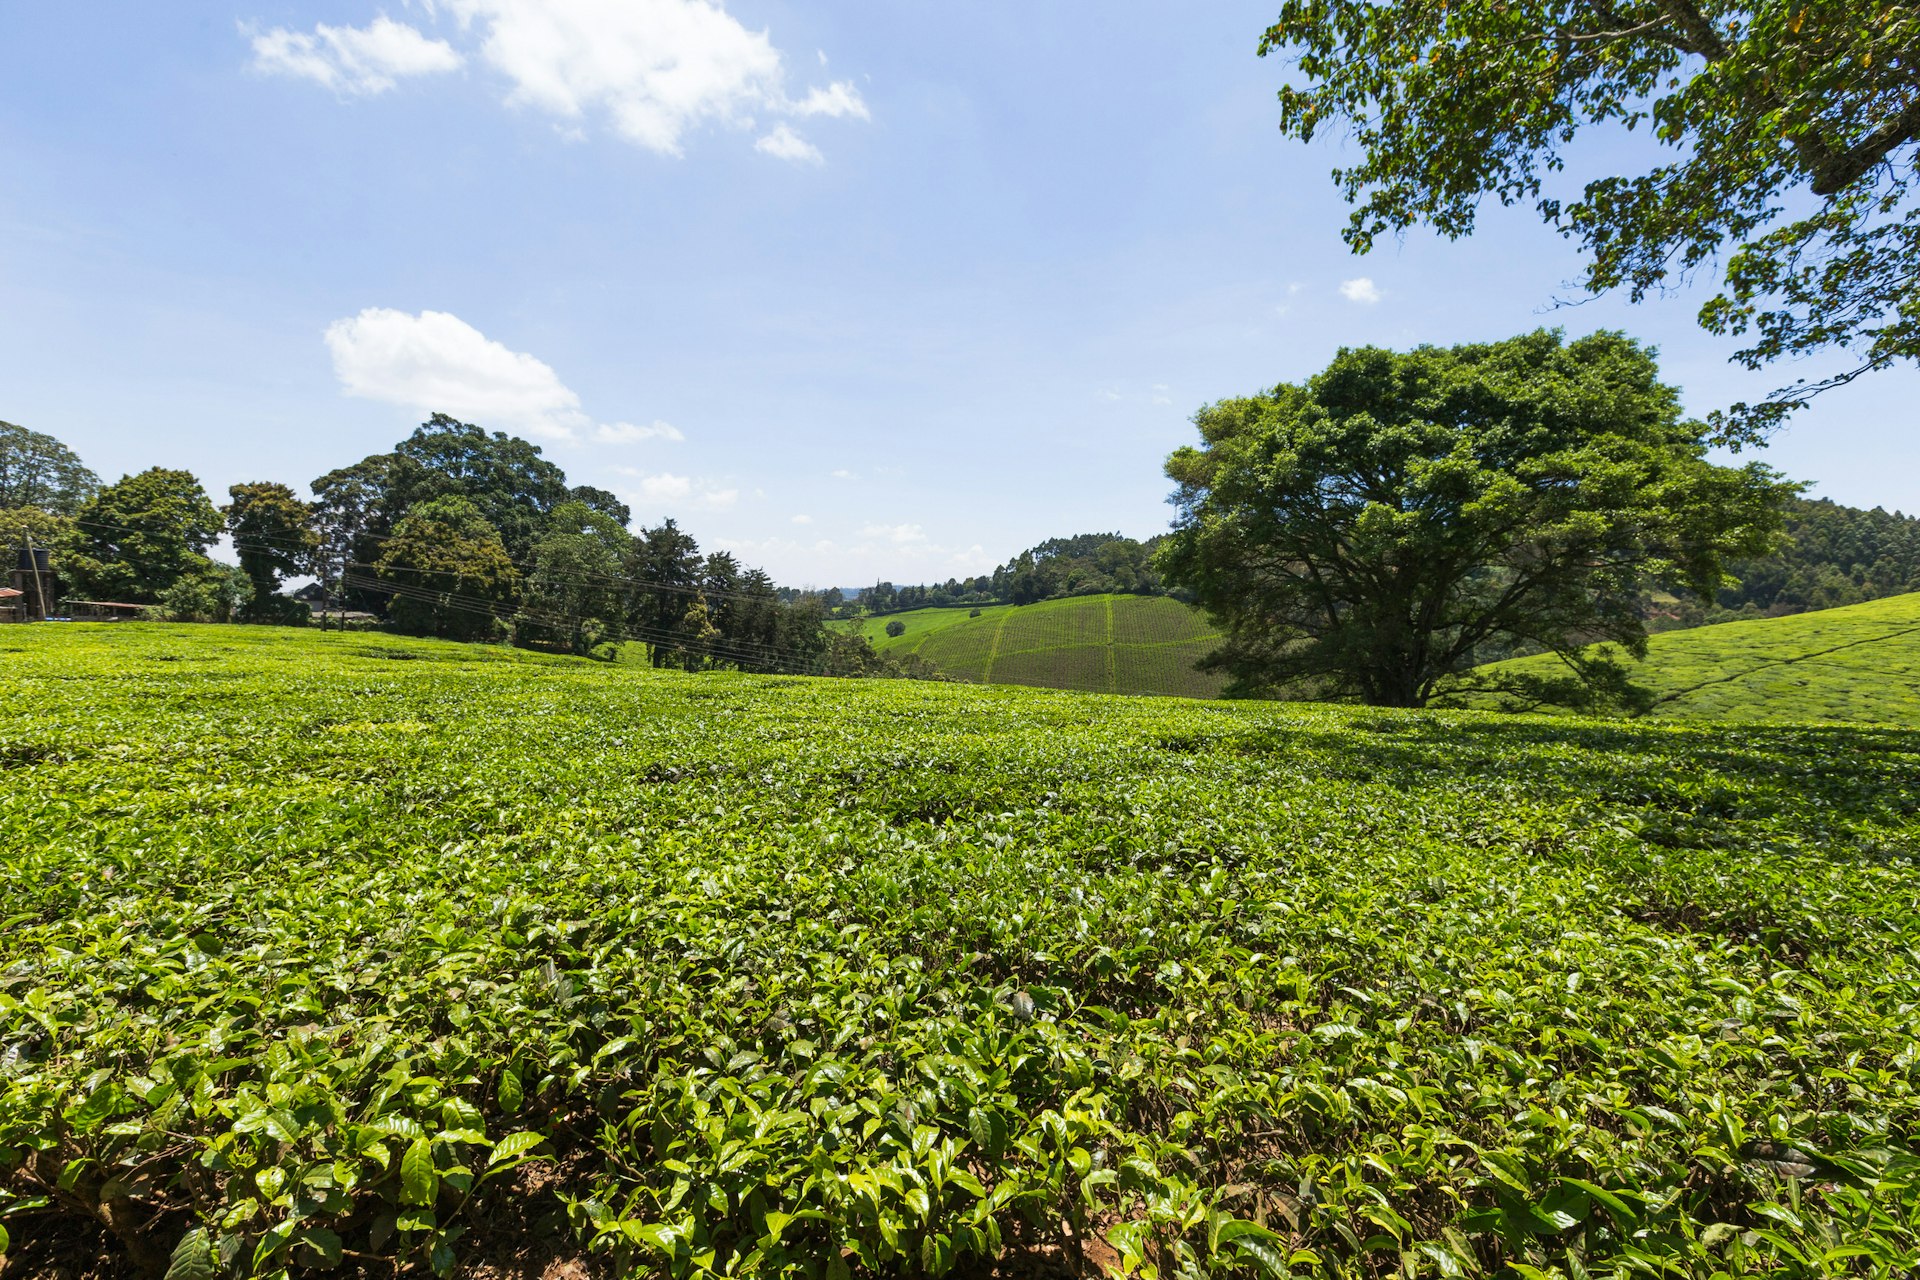 Sun shines on a verdant field of tea plants. There are trees lining the field and rolling hills in the distance.